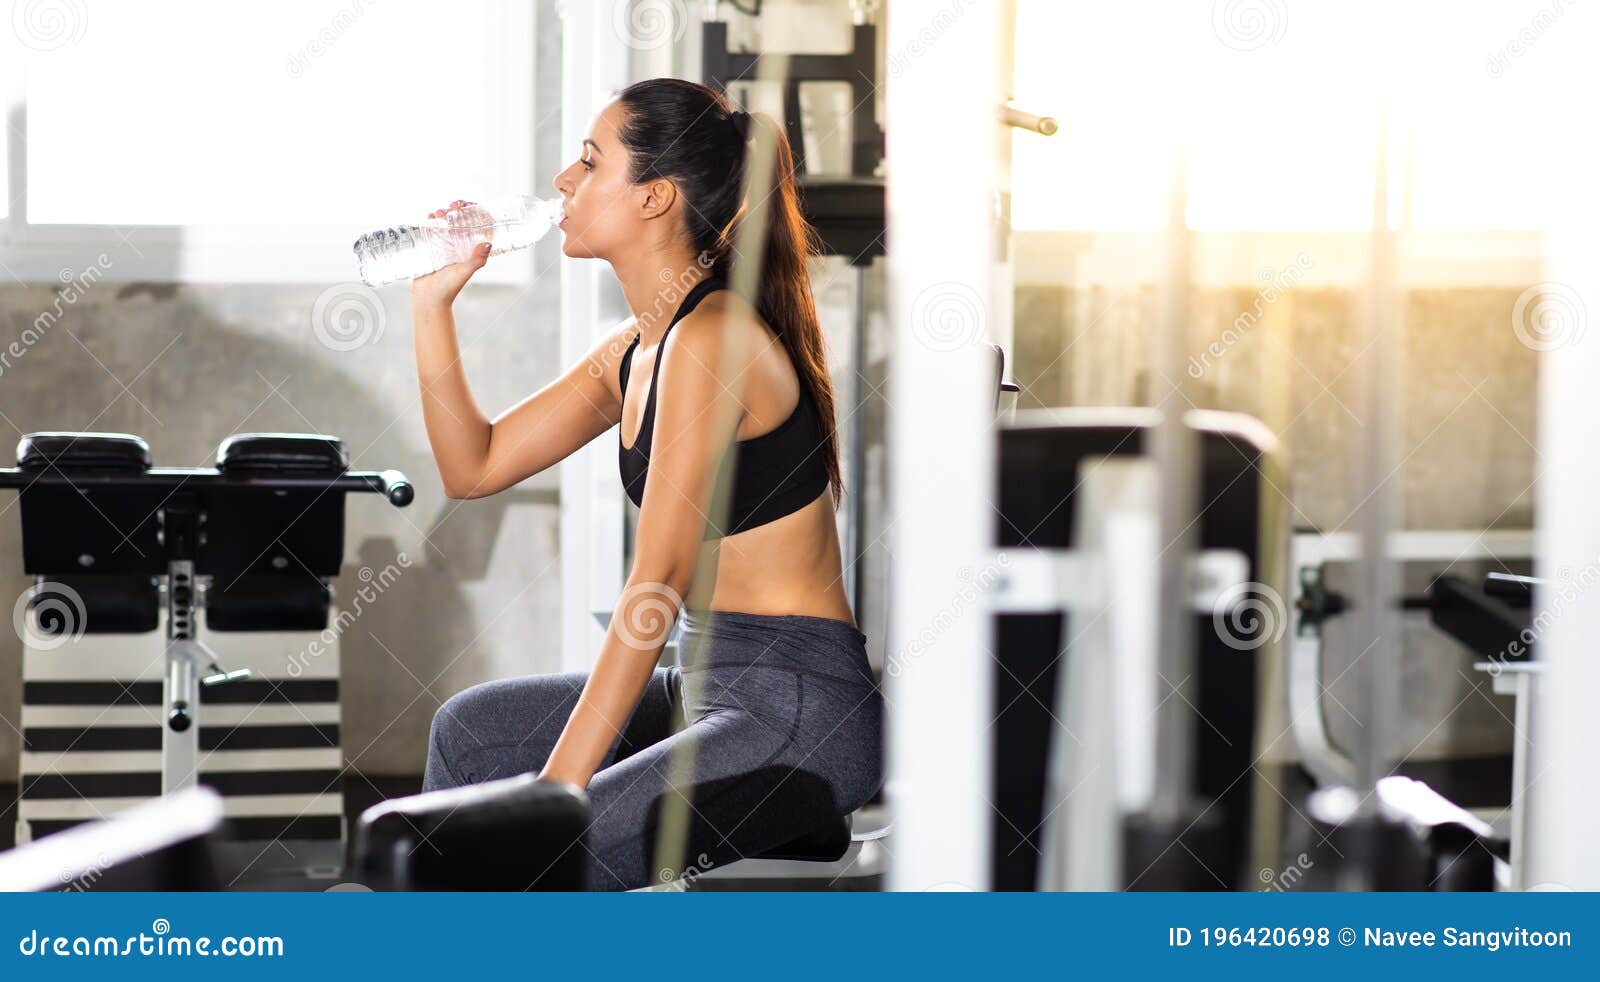 female athlete taking rest and drinking woter after exercising at gym. fitness healthy lifestye and workout at gym concept